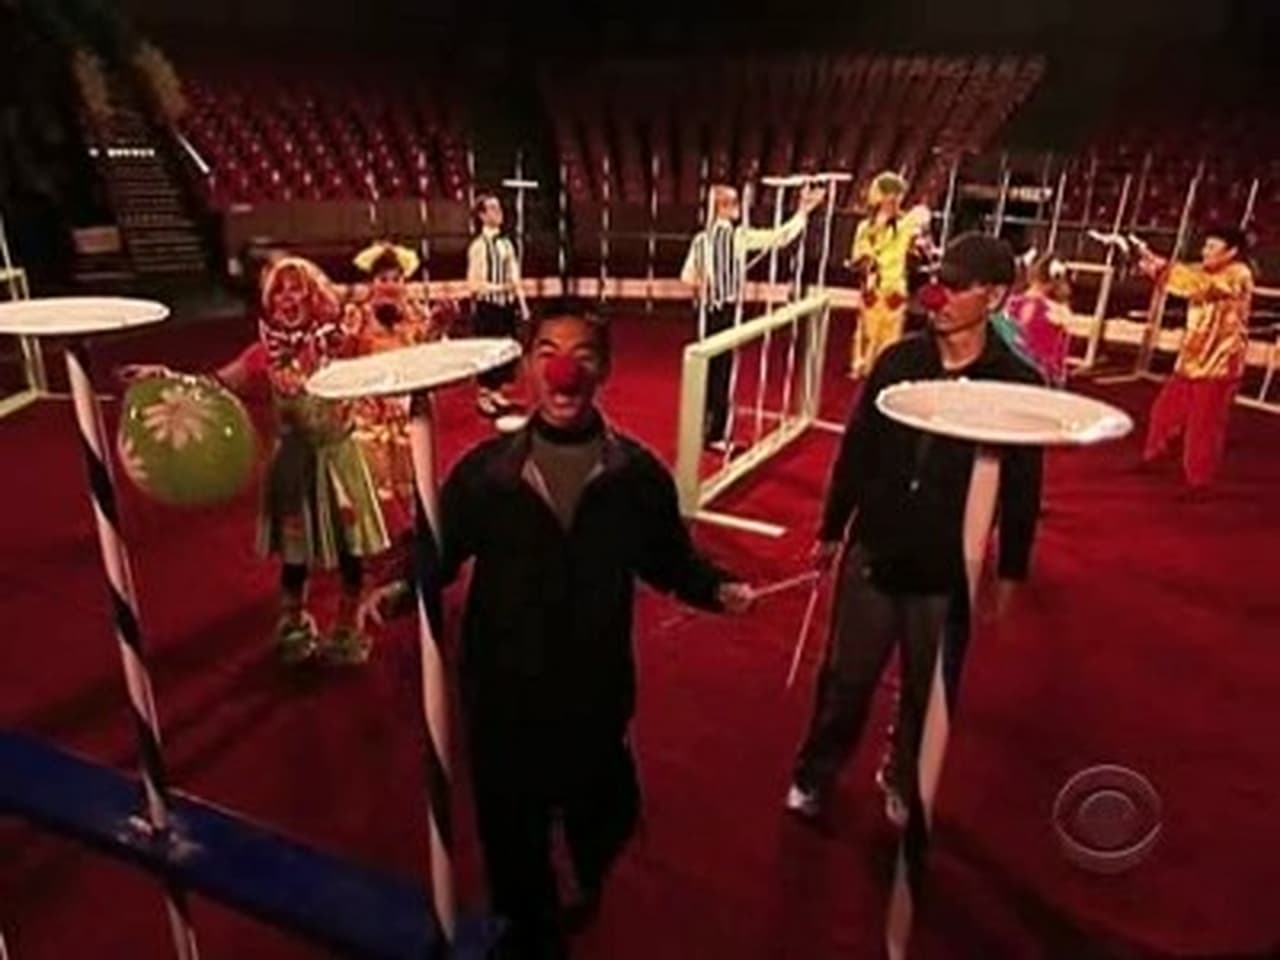 The Amazing Race - Season 17 Episode 7 : I Want to Be in the Circus, That's Where I Belong